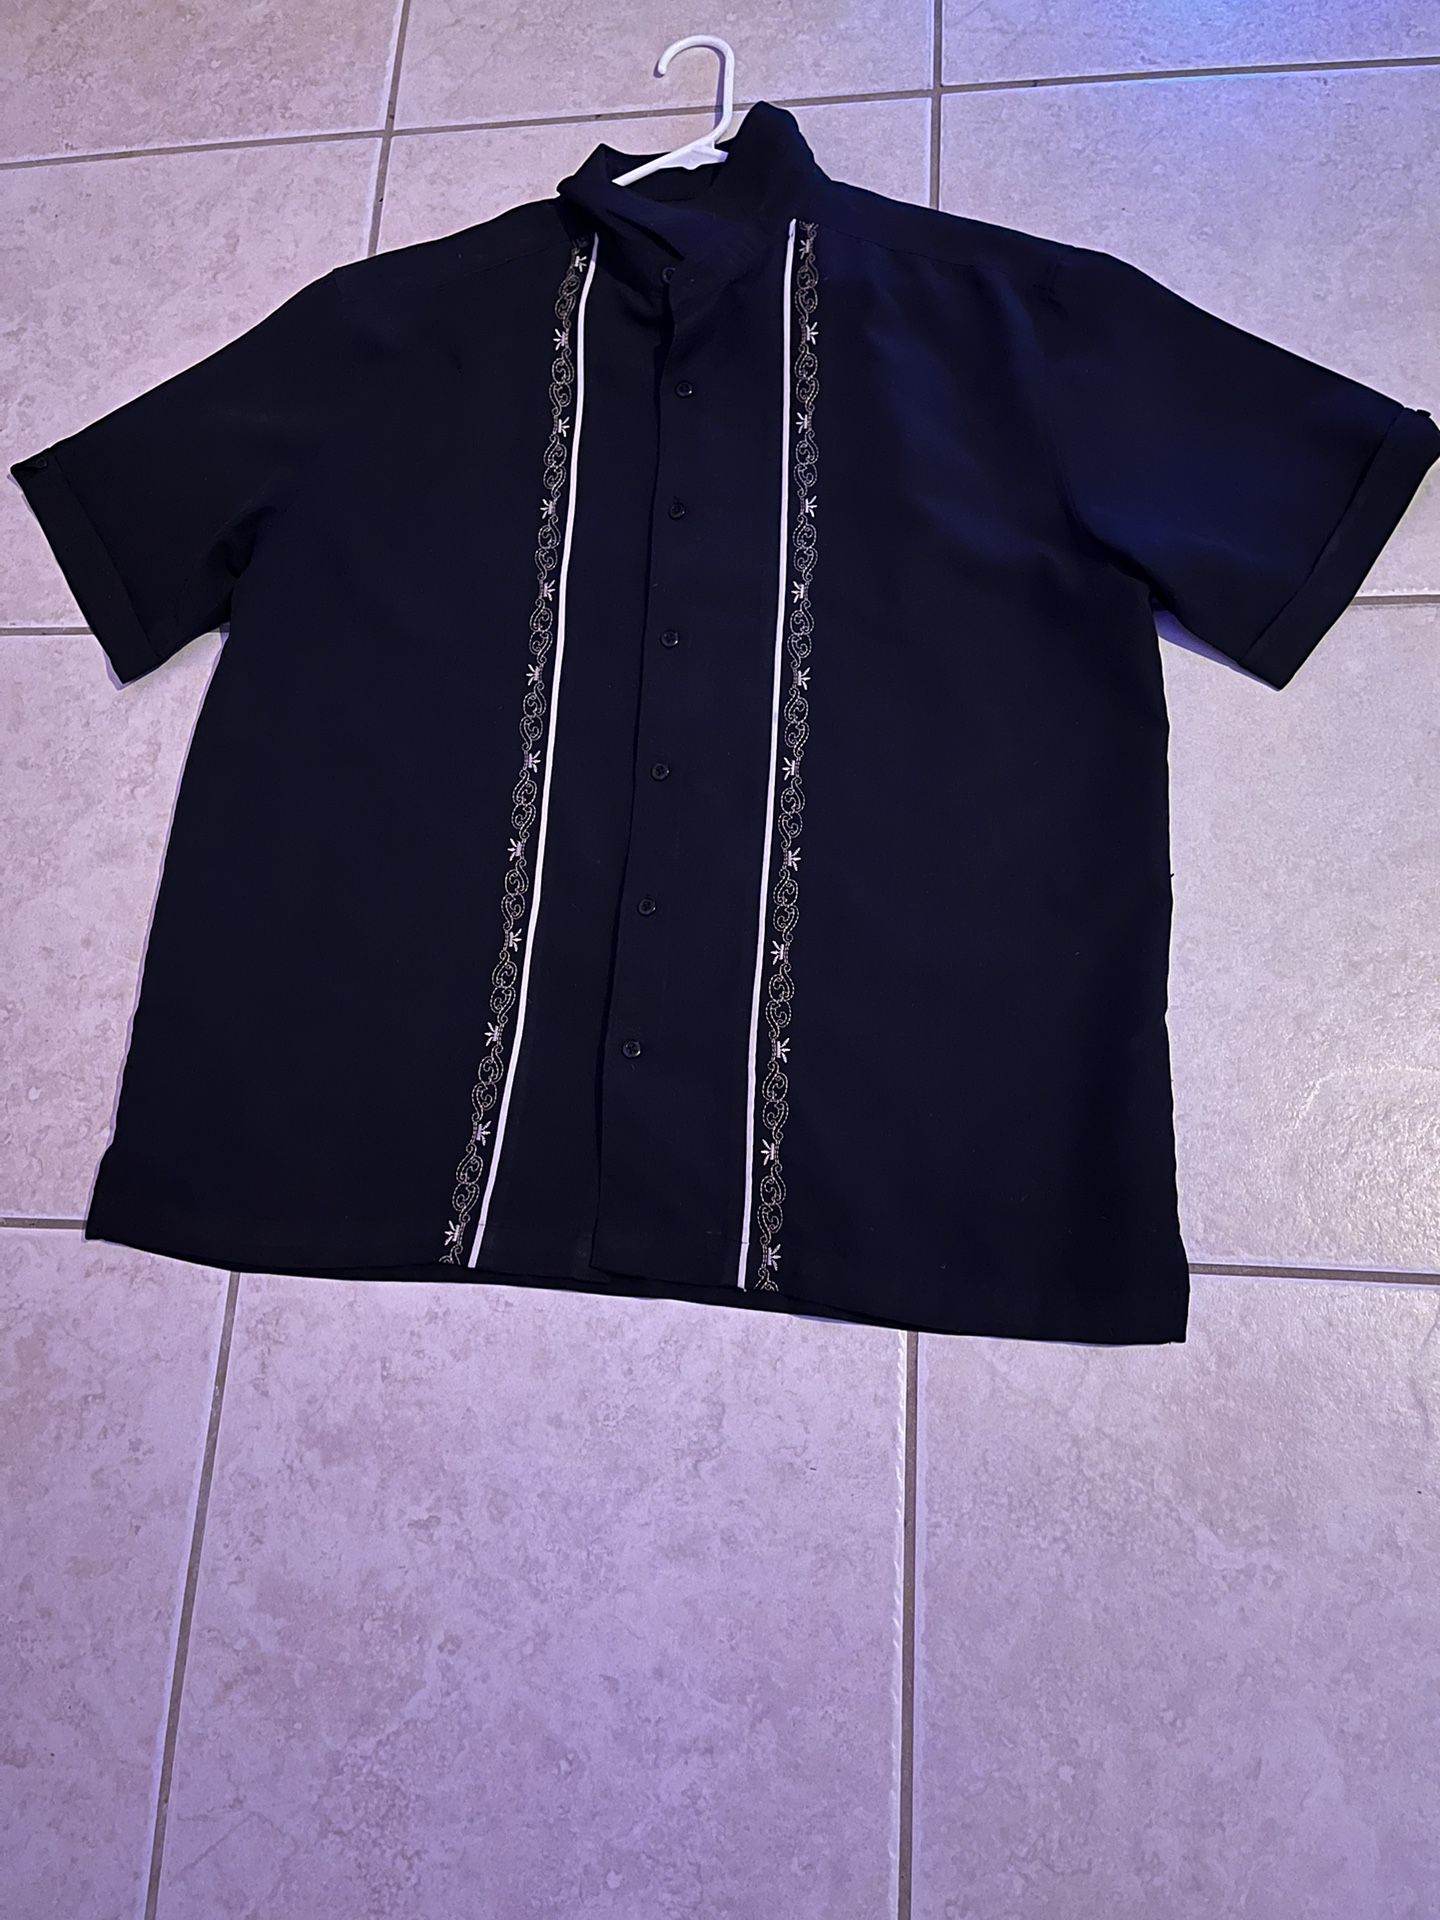 XL Black And White Button Up 